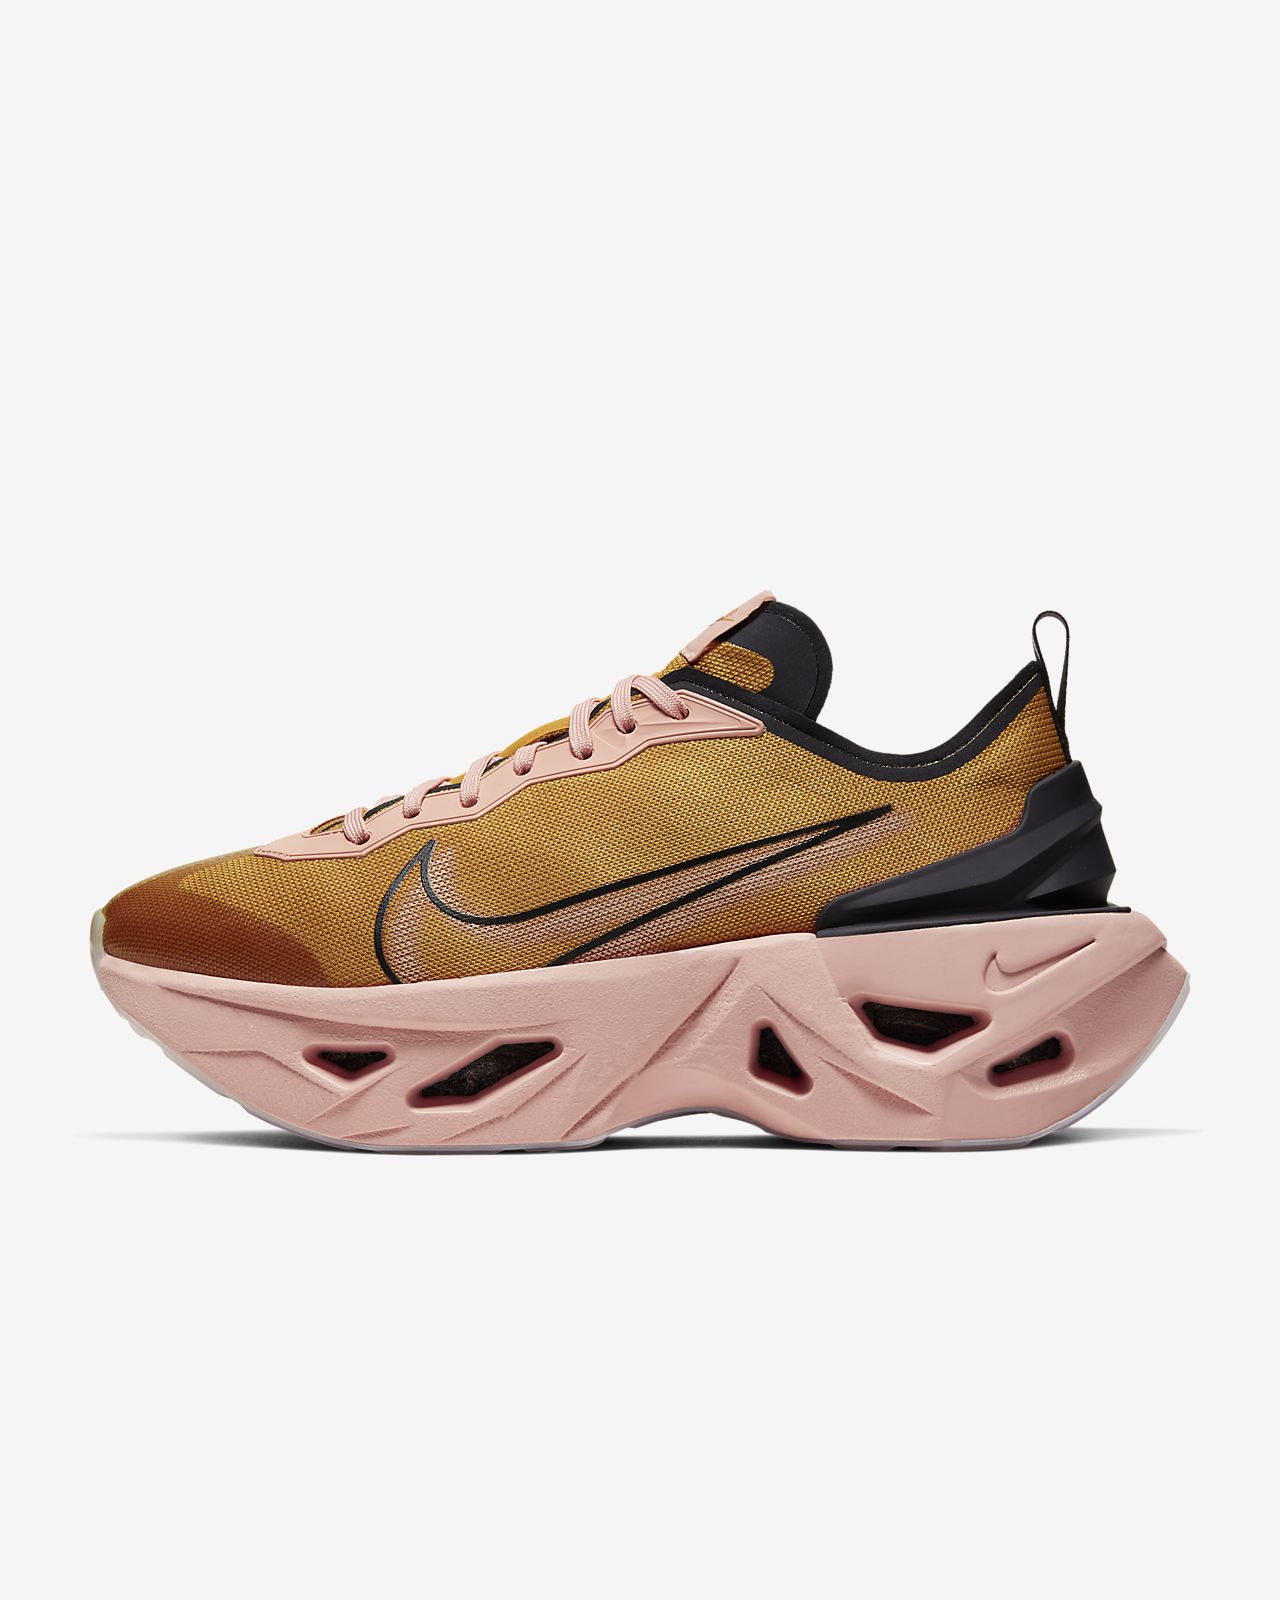 NIKE Official]Nike Zoom X Vista Grind Women's Shoe.Online store (mail order  site)